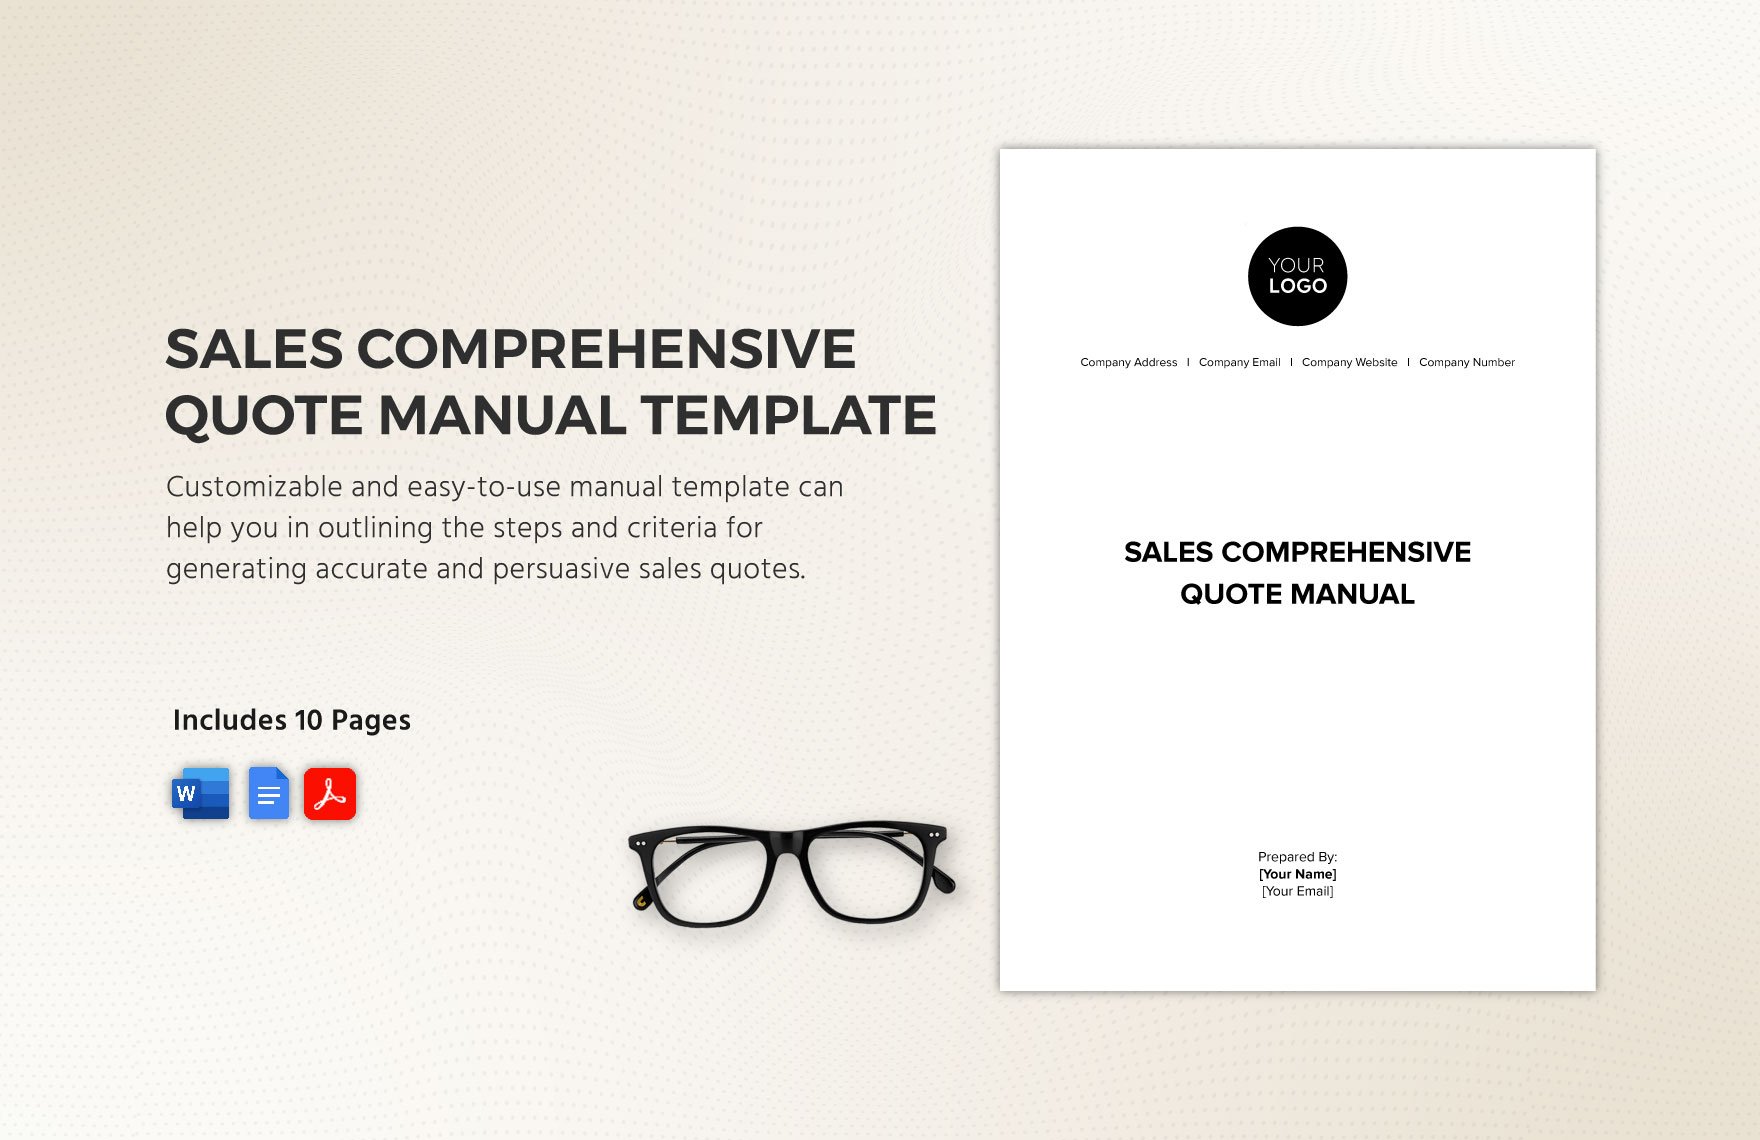 Sales Comprehensive Quote Manual Template